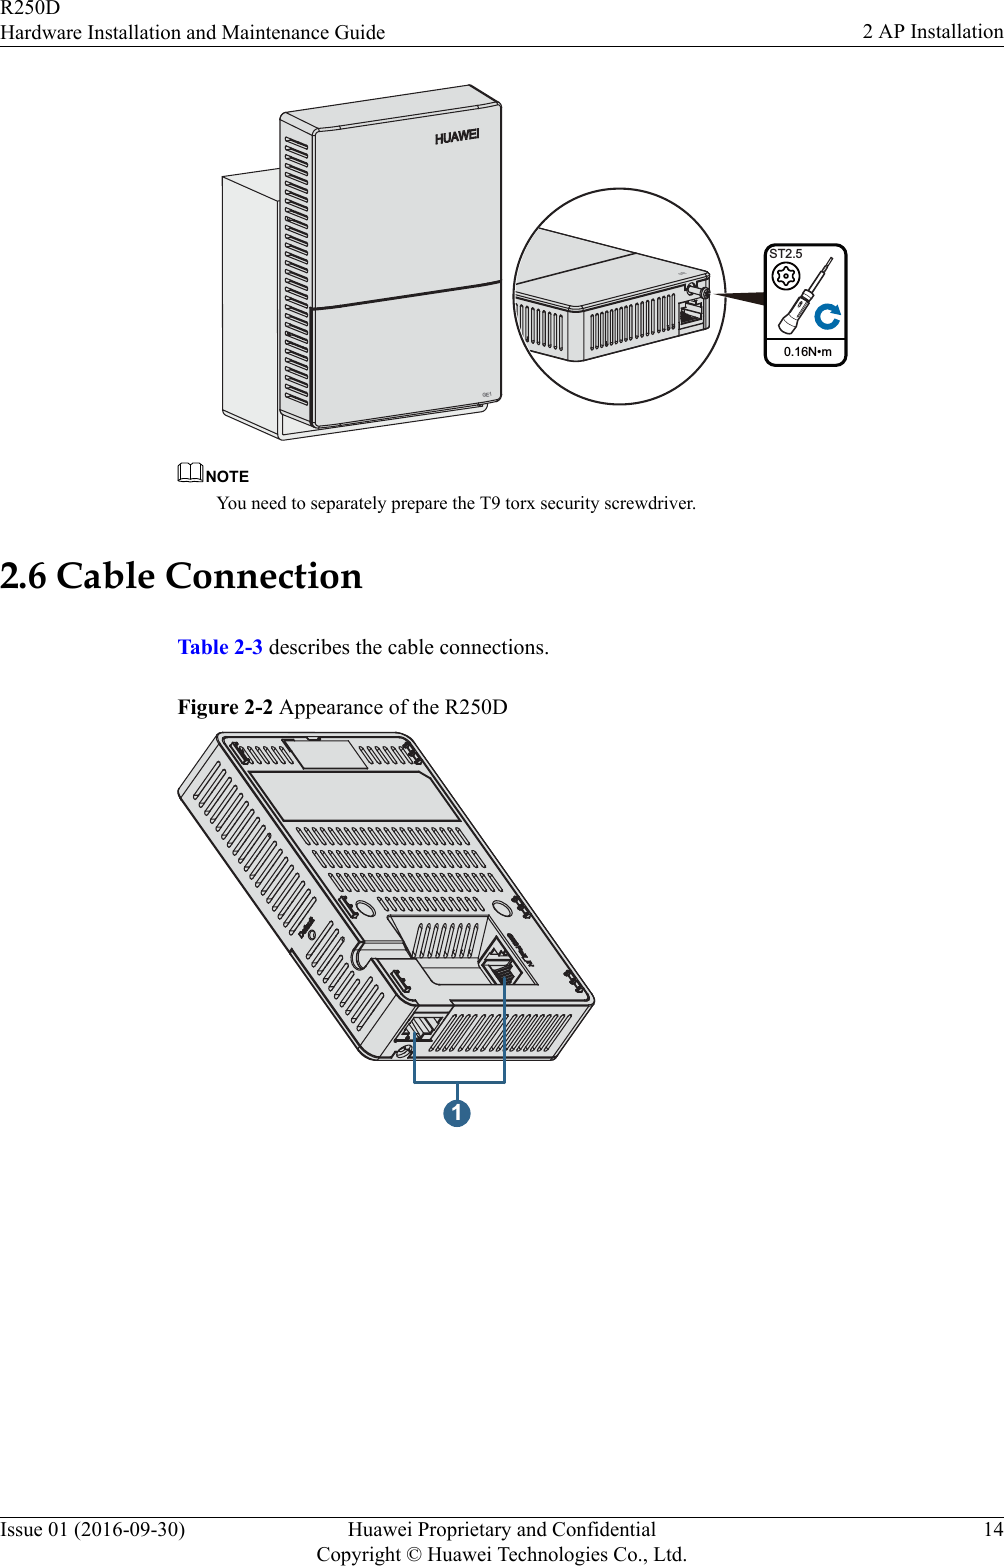 0.16N•mST2.5GE1GE1NOTEYou need to separately prepare the T9 torx security screwdriver.2.6 Cable ConnectionTable 2-3 describes the cable connections.Figure 2-2 Appearance of the R250D1R250DHardware Installation and Maintenance Guide 2 AP InstallationIssue 01 (2016-09-30) Huawei Proprietary and ConfidentialCopyright © Huawei Technologies Co., Ltd.14